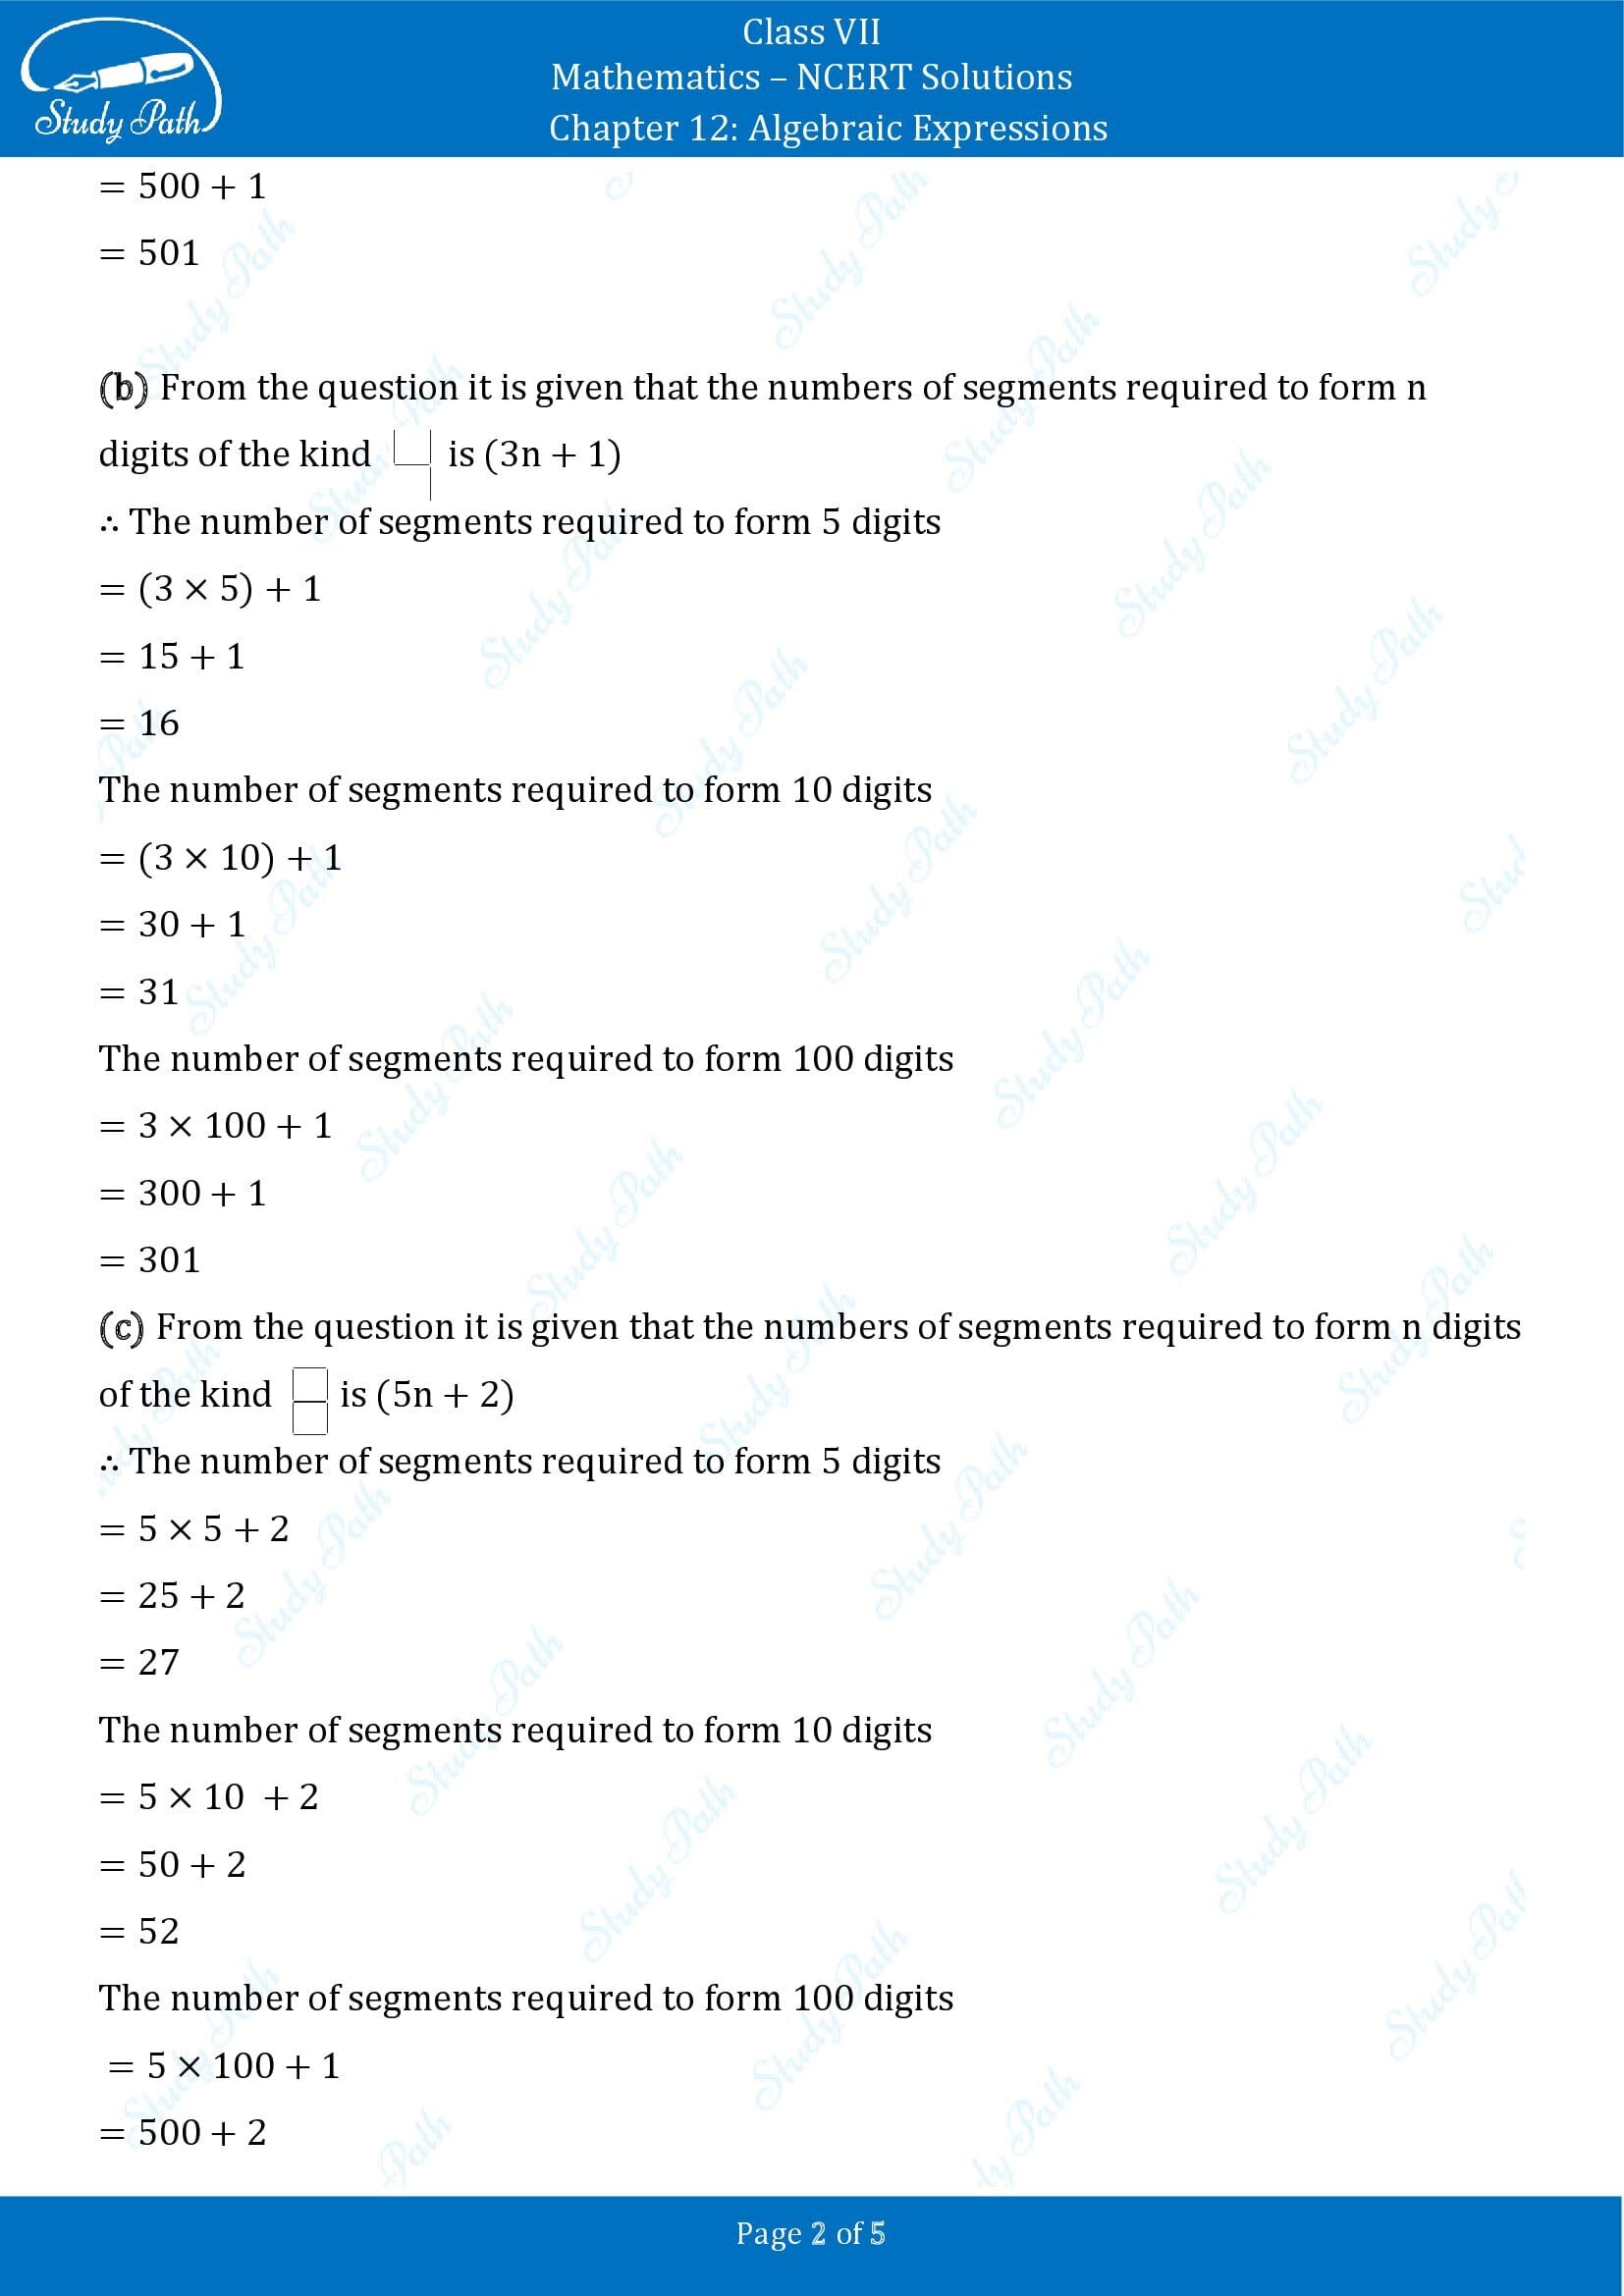 NCERT Solutions for Class 7 Maths Chapter 12 Algebraic Expressions Exercise 12.4 00002